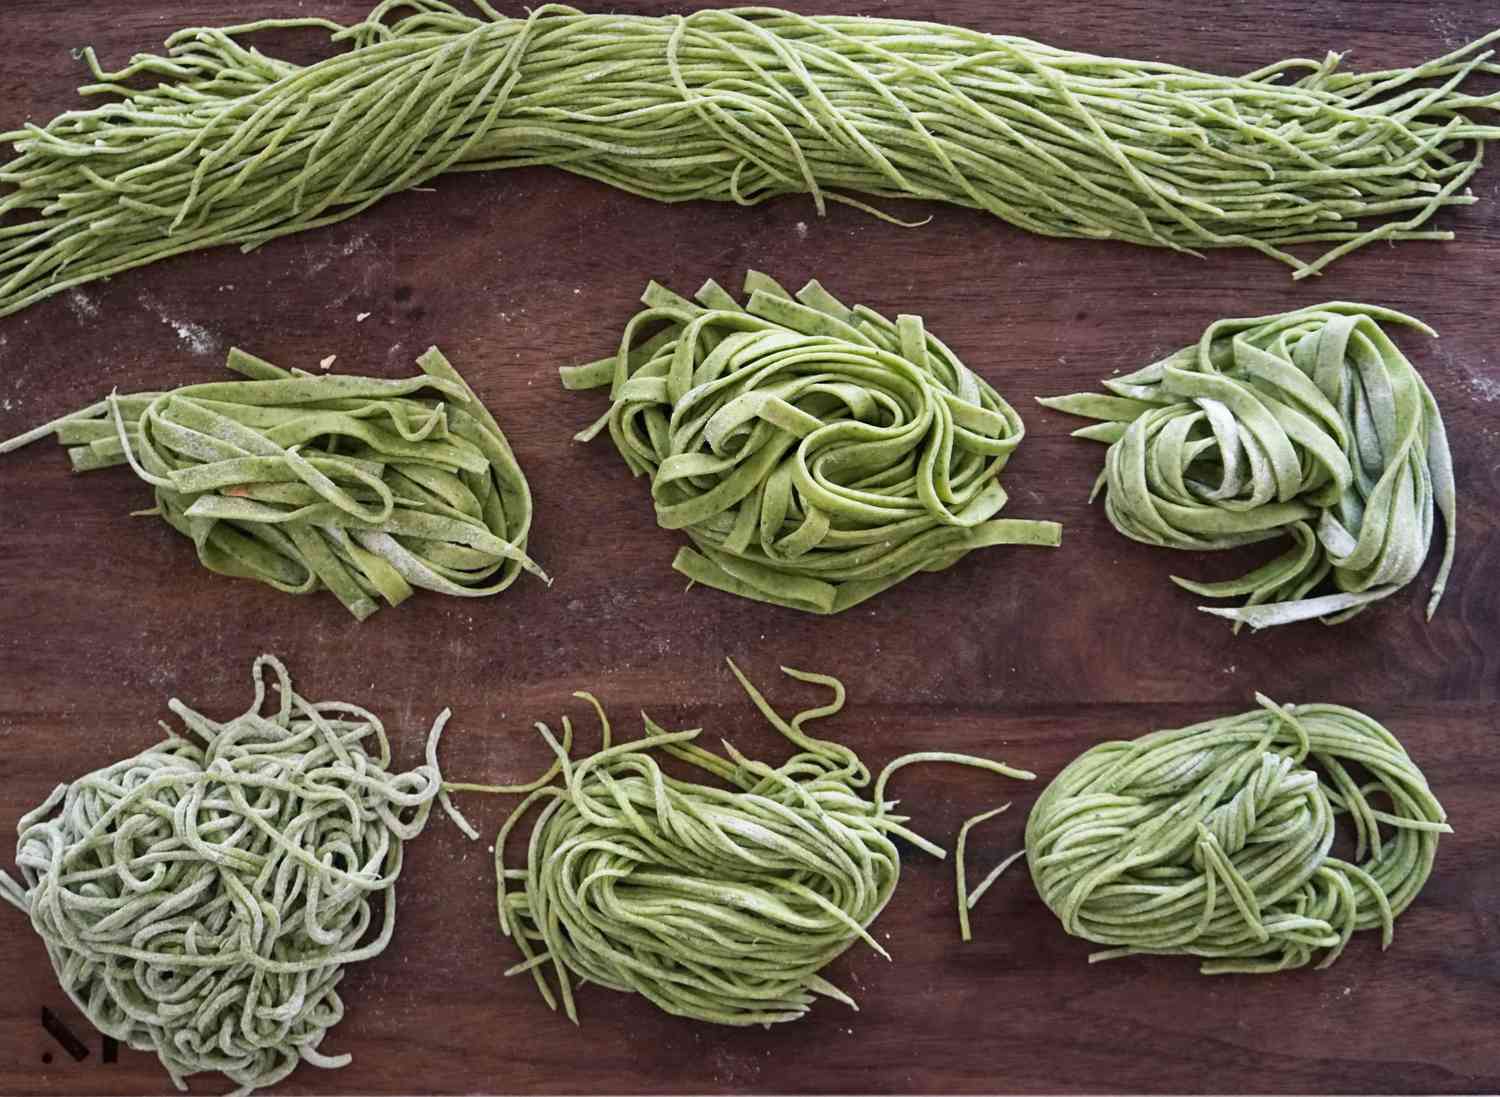 All You Need to Make This Healthy Homemade Pasta Is Flour, Salt, and Leafy  Greens